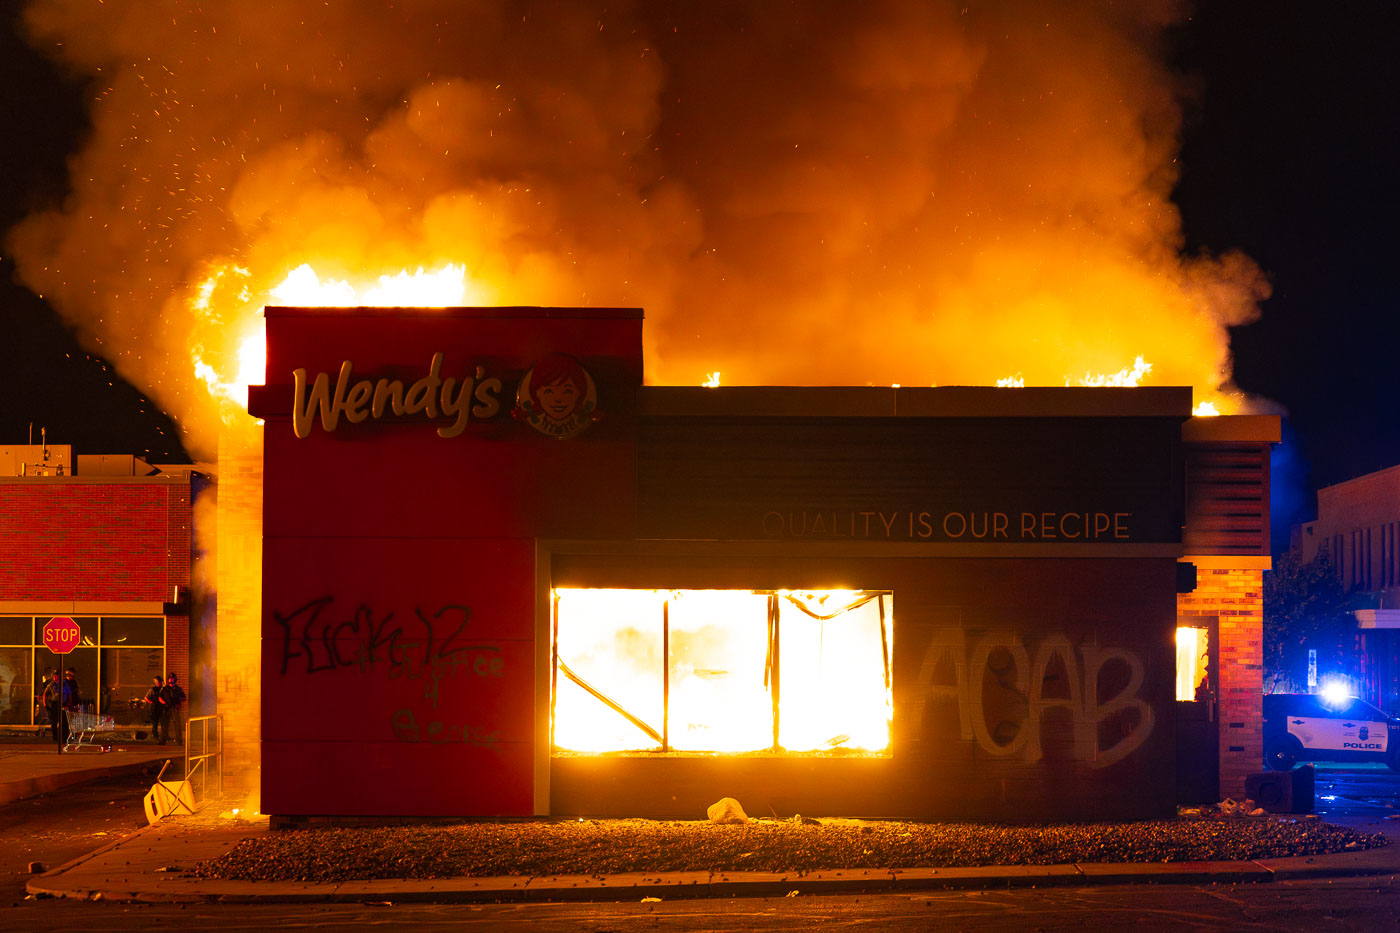 Wendys on fire during George Floyd protests in Minneapolis